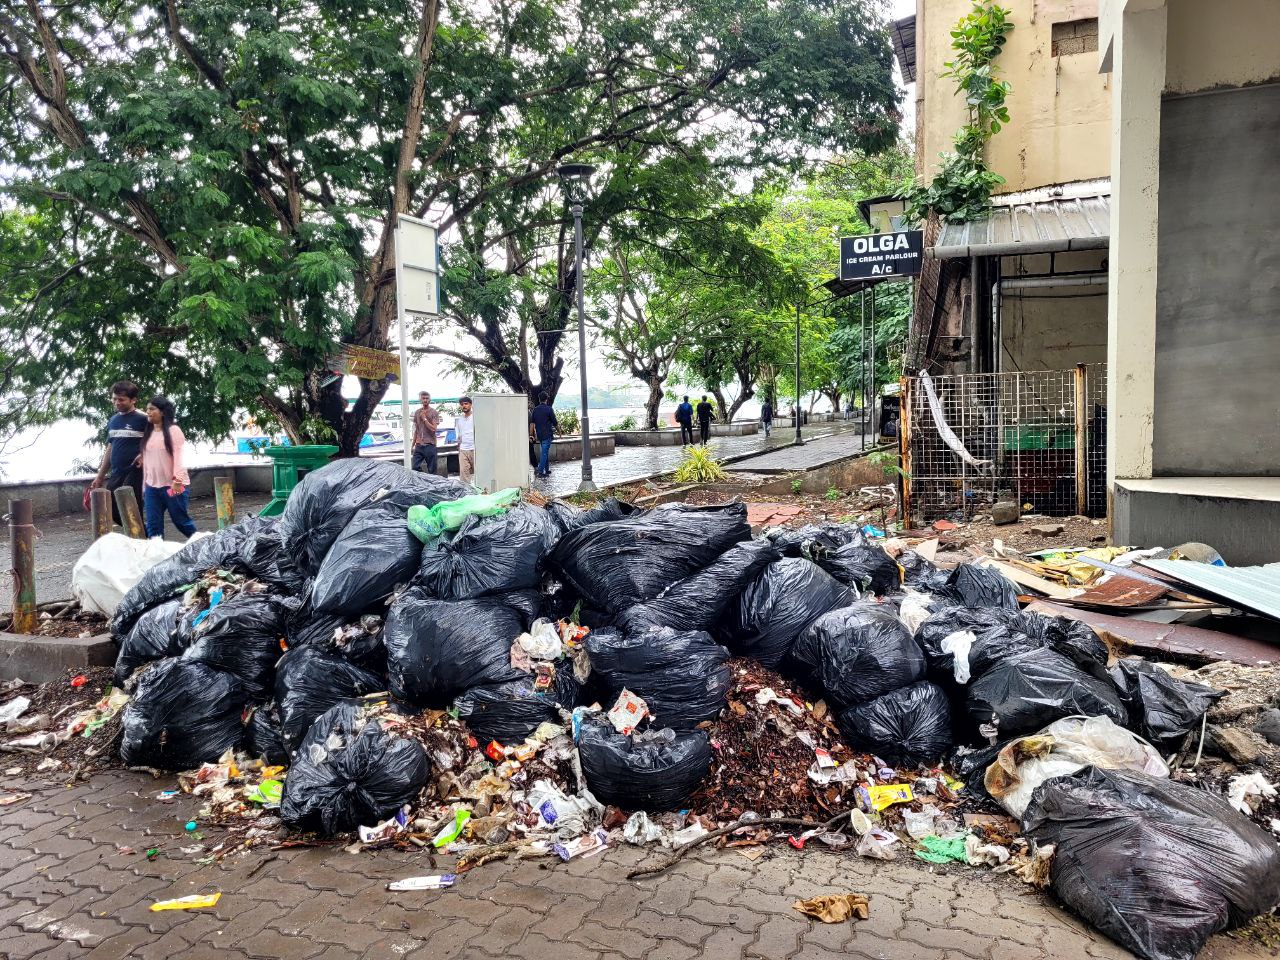 Waste Piled up at entrance of Marine Drive Walkway